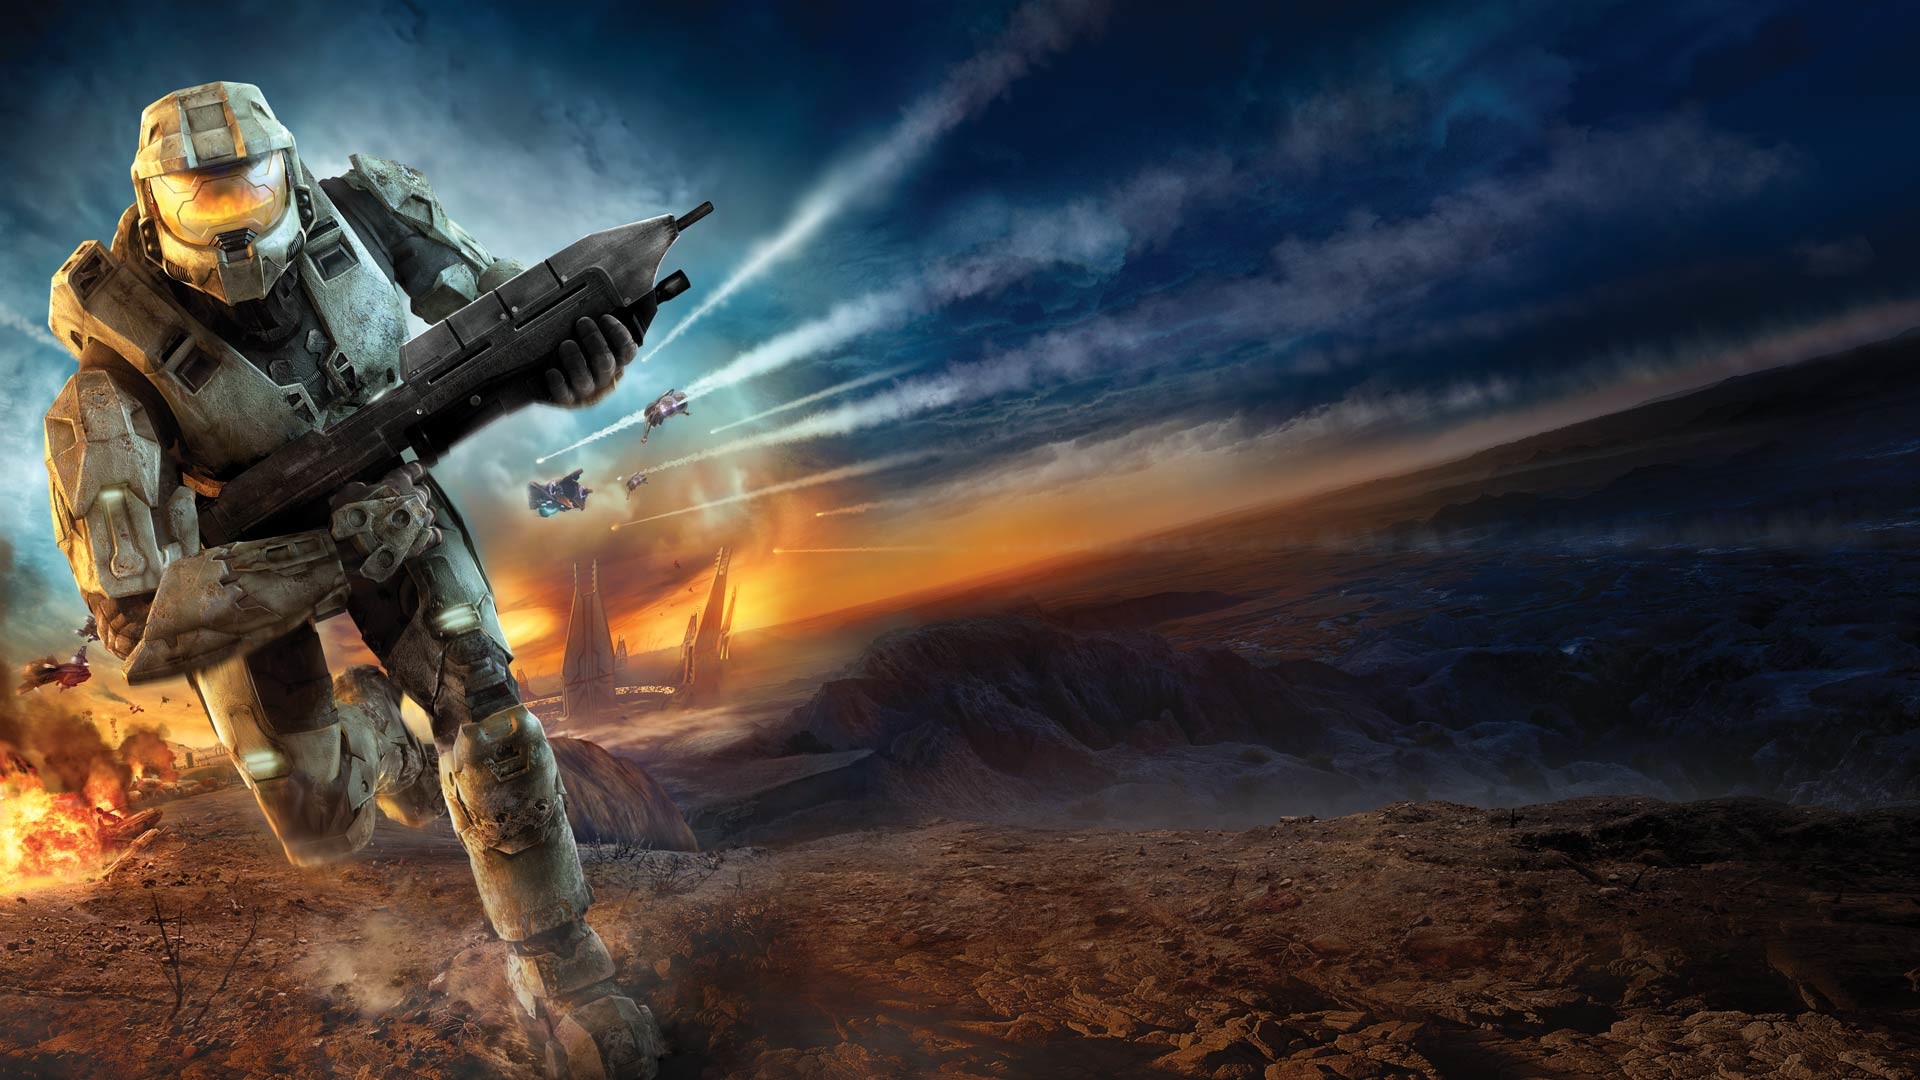 1920x1080 High Resolution Halo 3 Odst Wallpaper HD 12 Game Full Size ... | Download  Wallpaper | Pinterest | Wallpaper